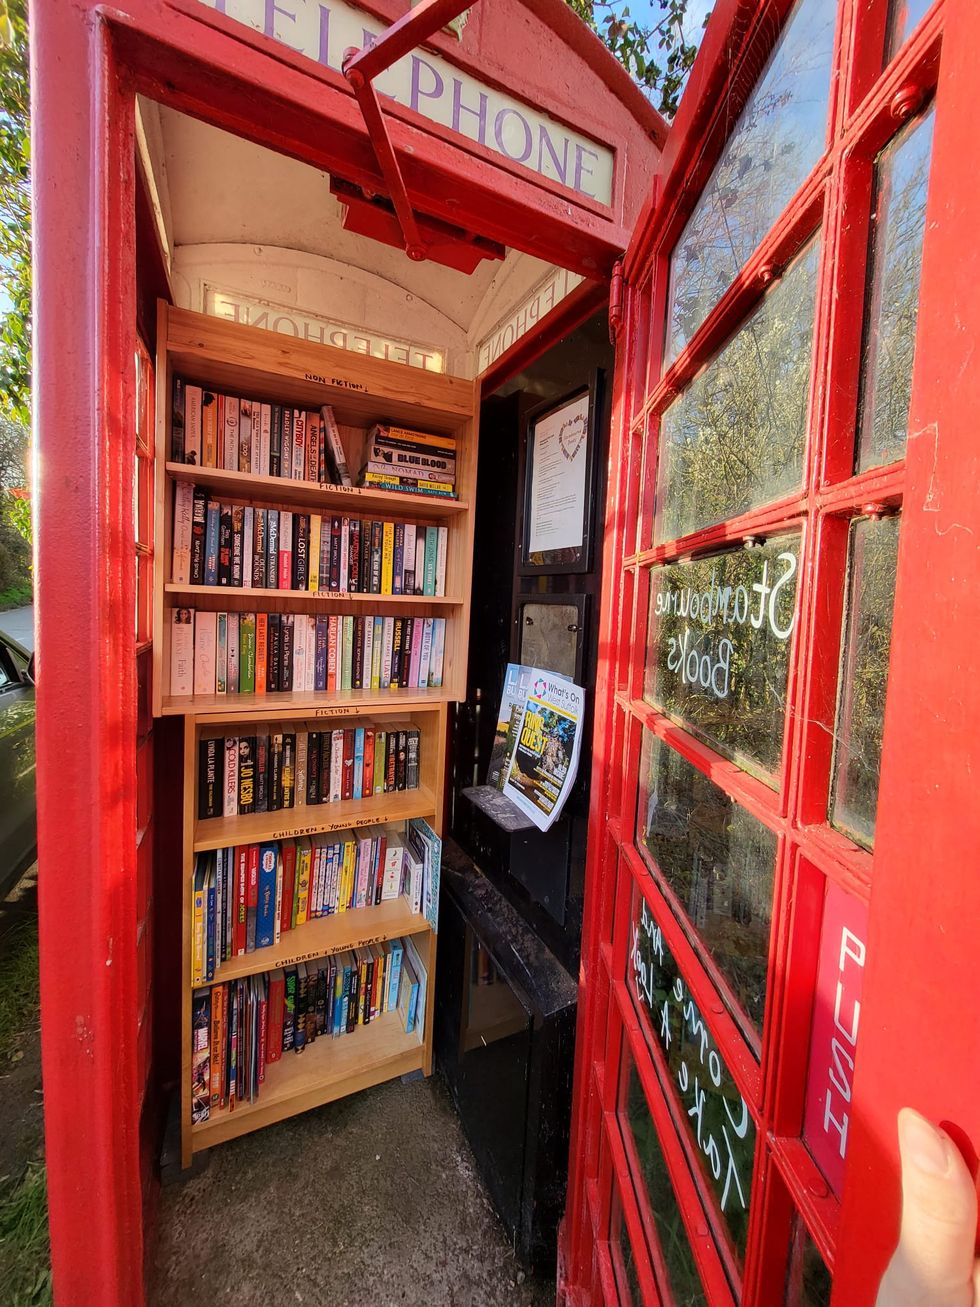 World Book Day: Red telephone box libraries bring ‘magic’ of books to community